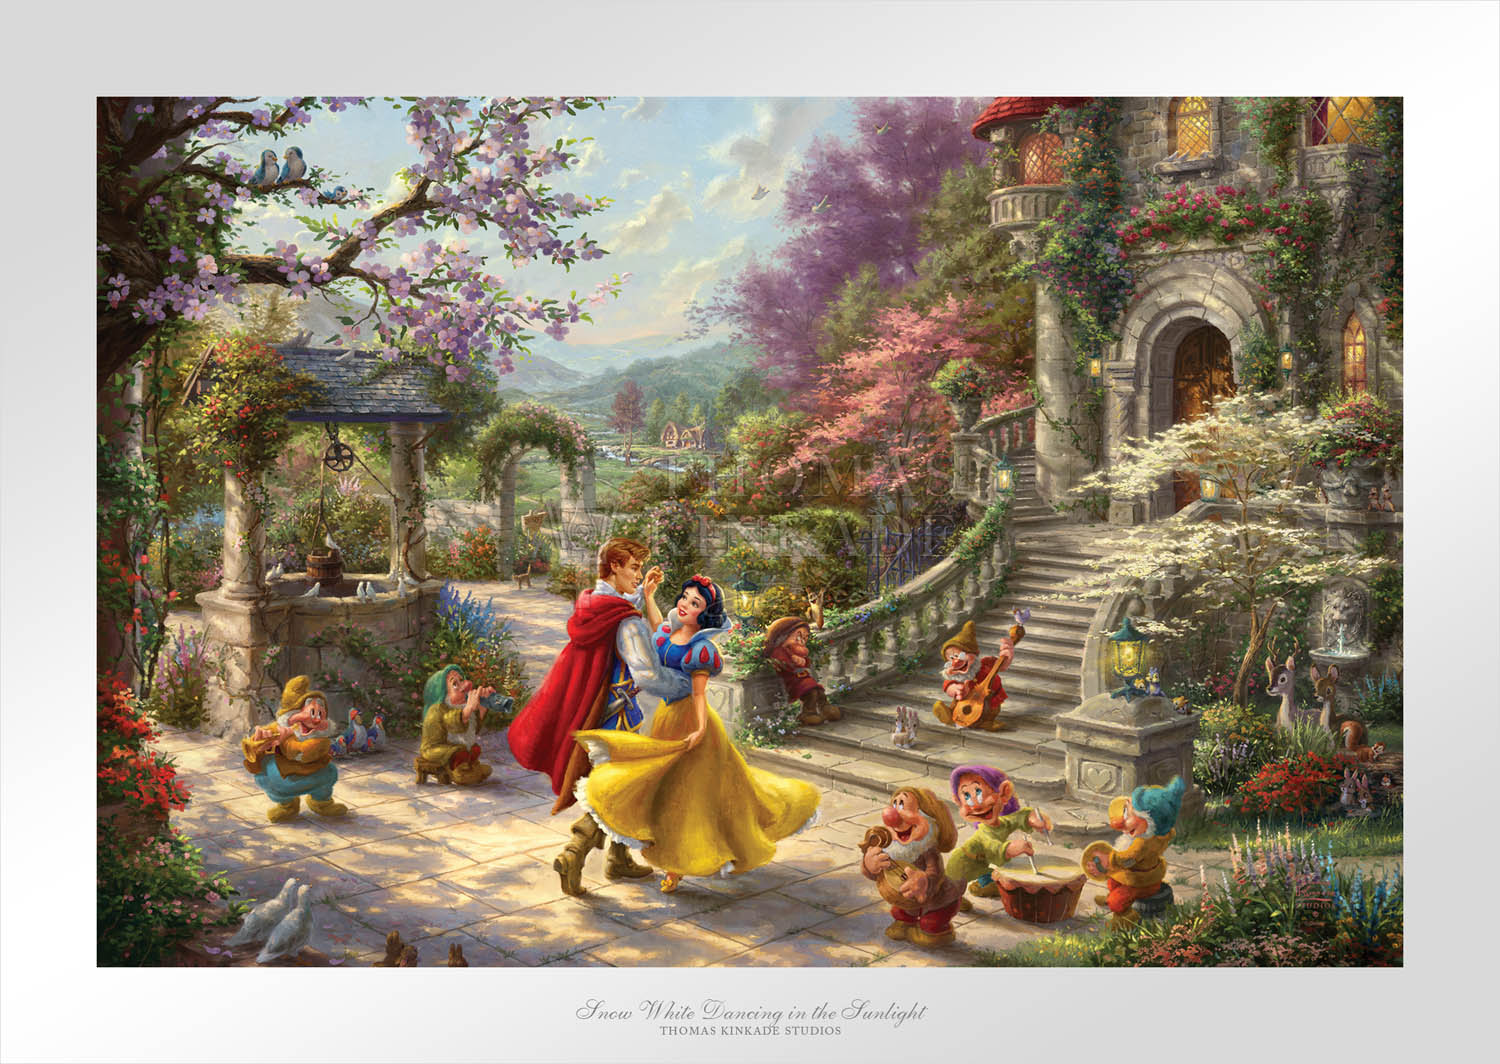 This romantic scene takes place in the courtyard of the kingdom’s castle, where Snow White and all of her friends are celebrating the defeat of the wicked Queen and reuniting of true love.